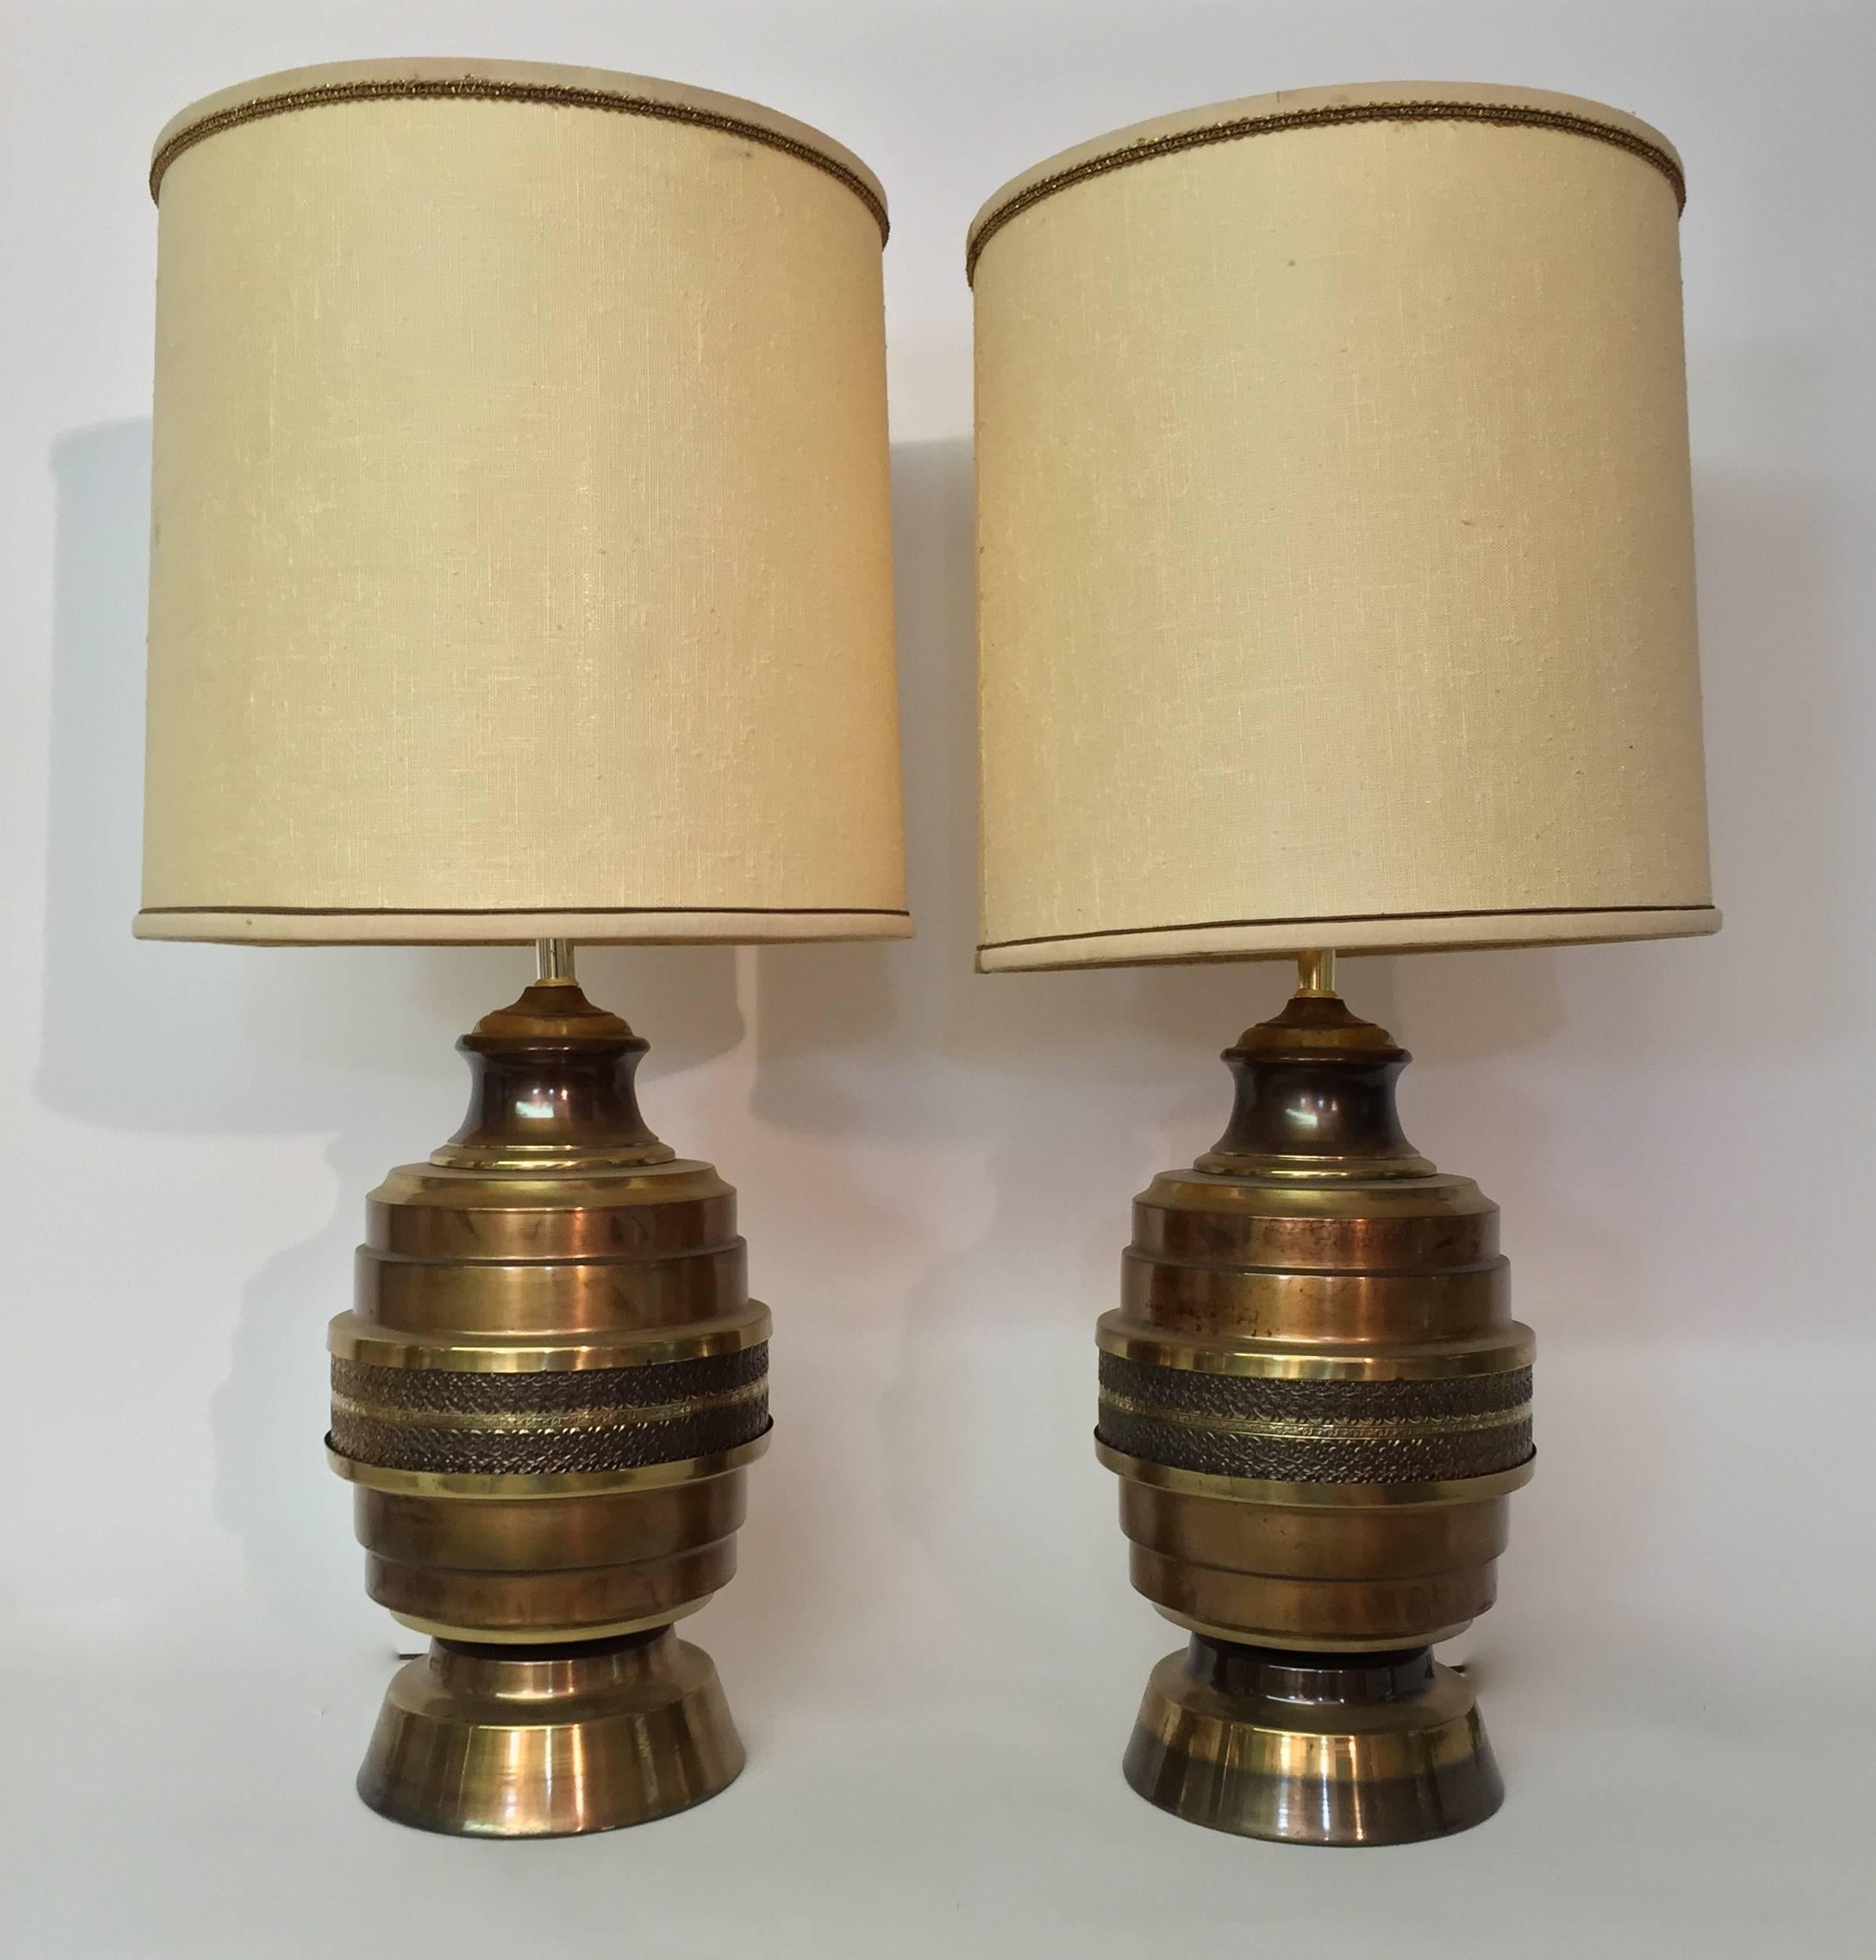 Fine pair of 1960s copper and brass finish lamps. The middle band is decorated in a floral scroll pattern. Large and impressive with a very nice mellow patina.

Shades are not included.